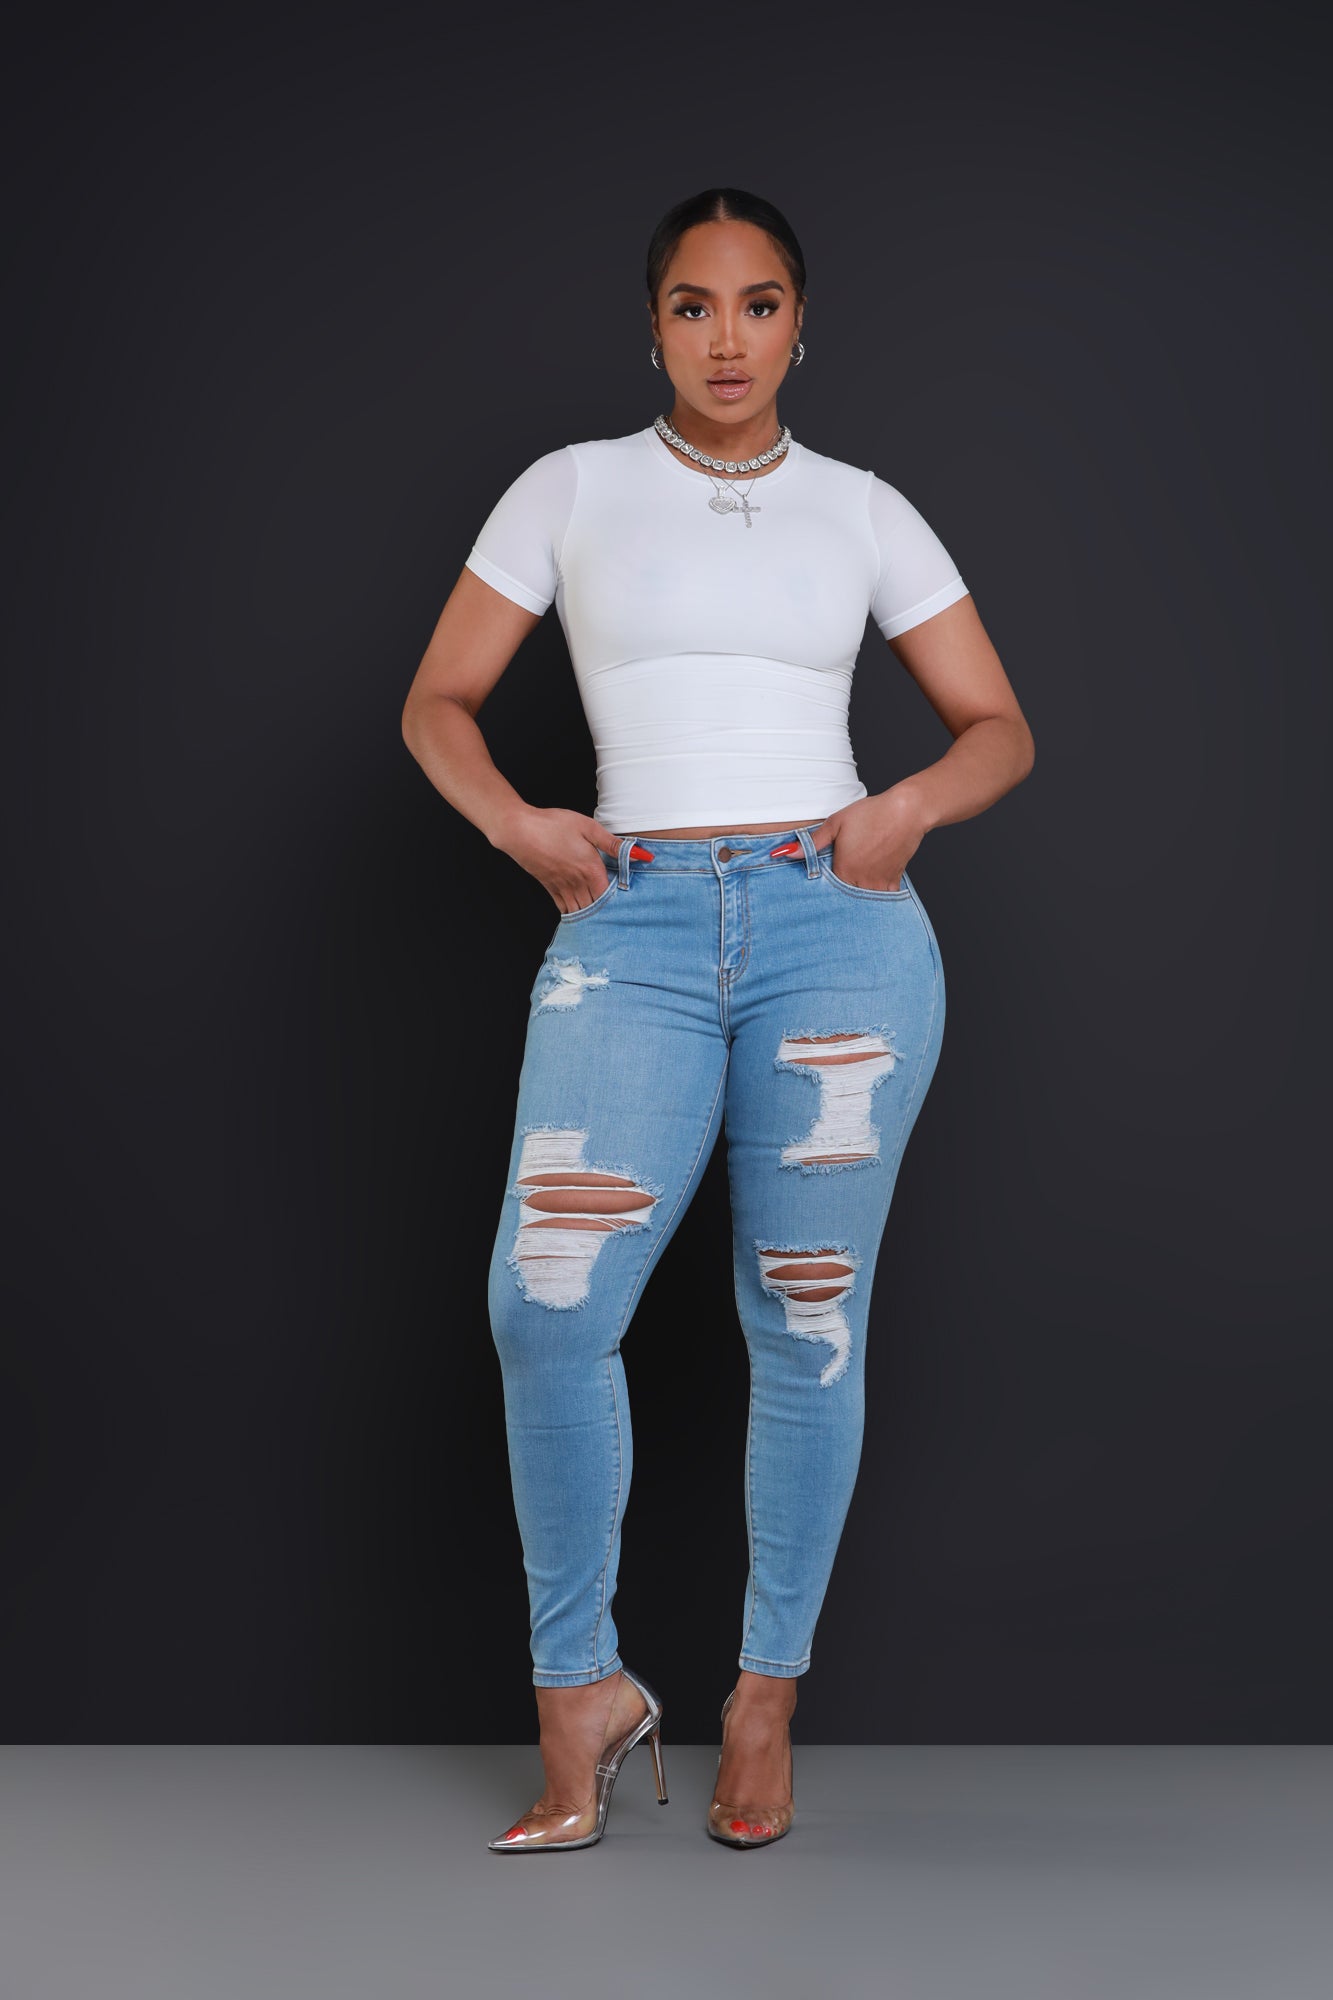 Not With You Hourglass Distressed Skinny Jeans - Light Wash - Swank A Posh